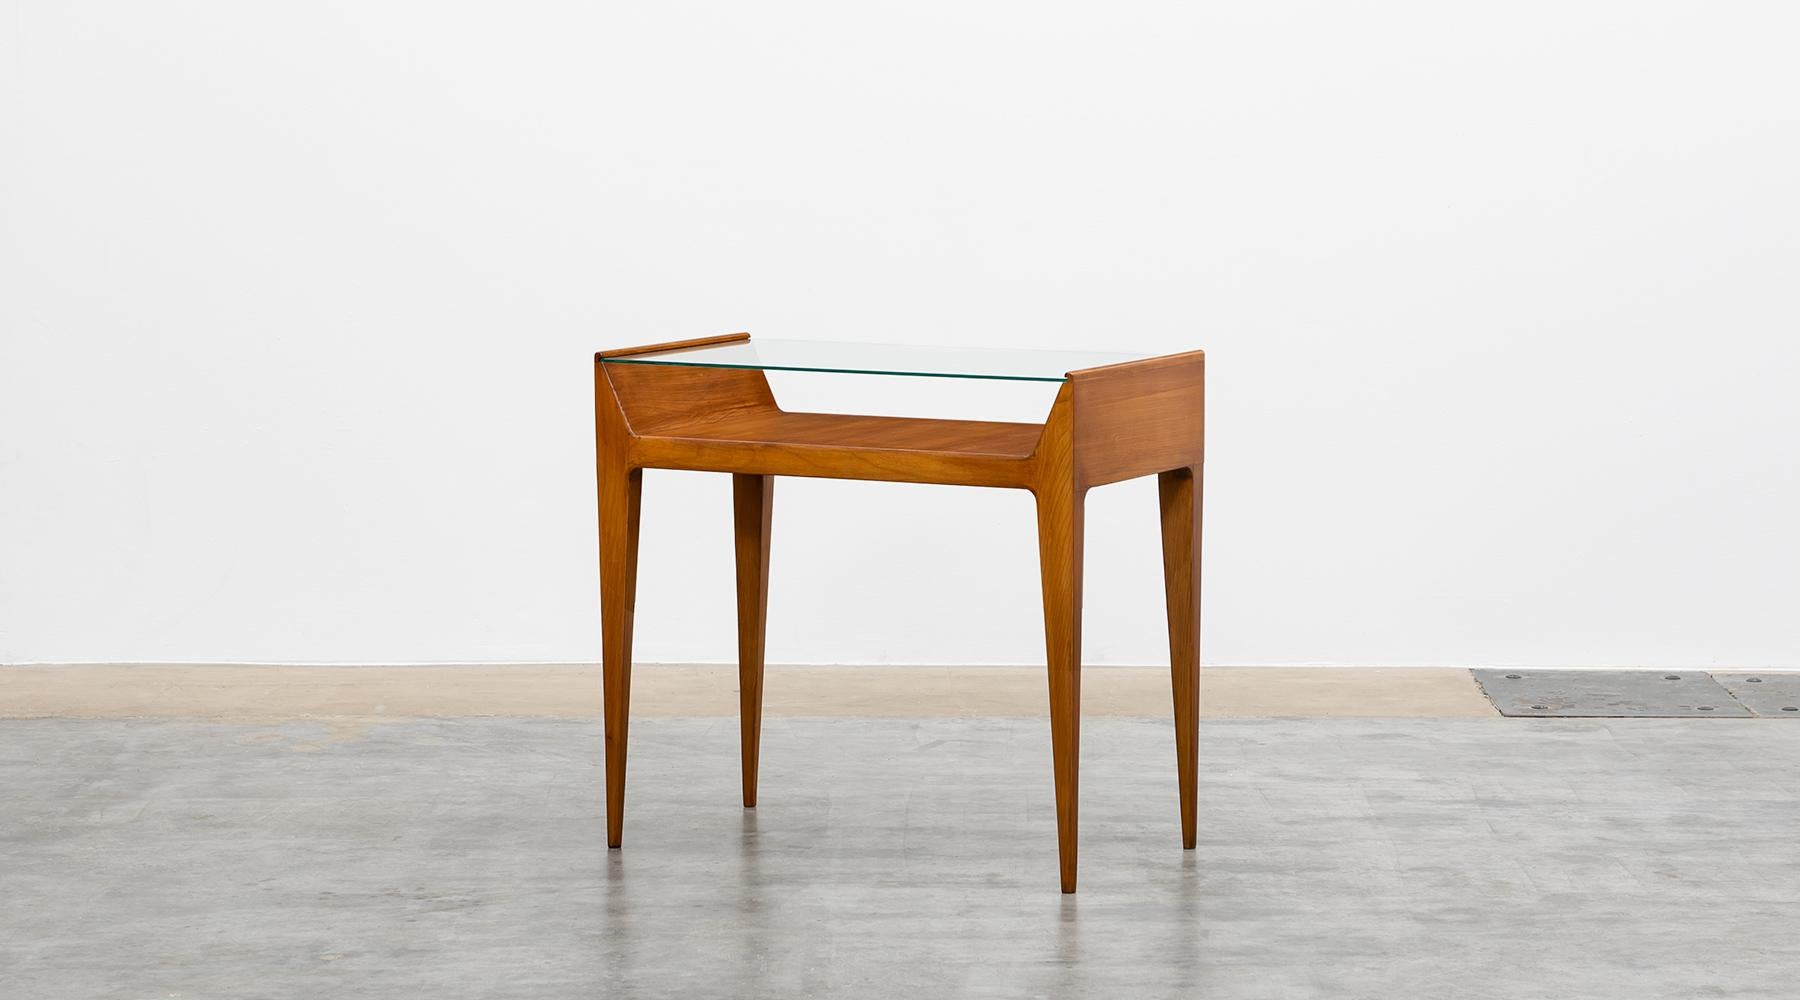 Console, cherrywood, polished glass, Gio Ponti, Italy, 1955.

Beautiful console in cherrywood, designed by the famous Gio Ponti. The top is made of polished glass and offers a storage space underneath. The console has an unusual height, which only